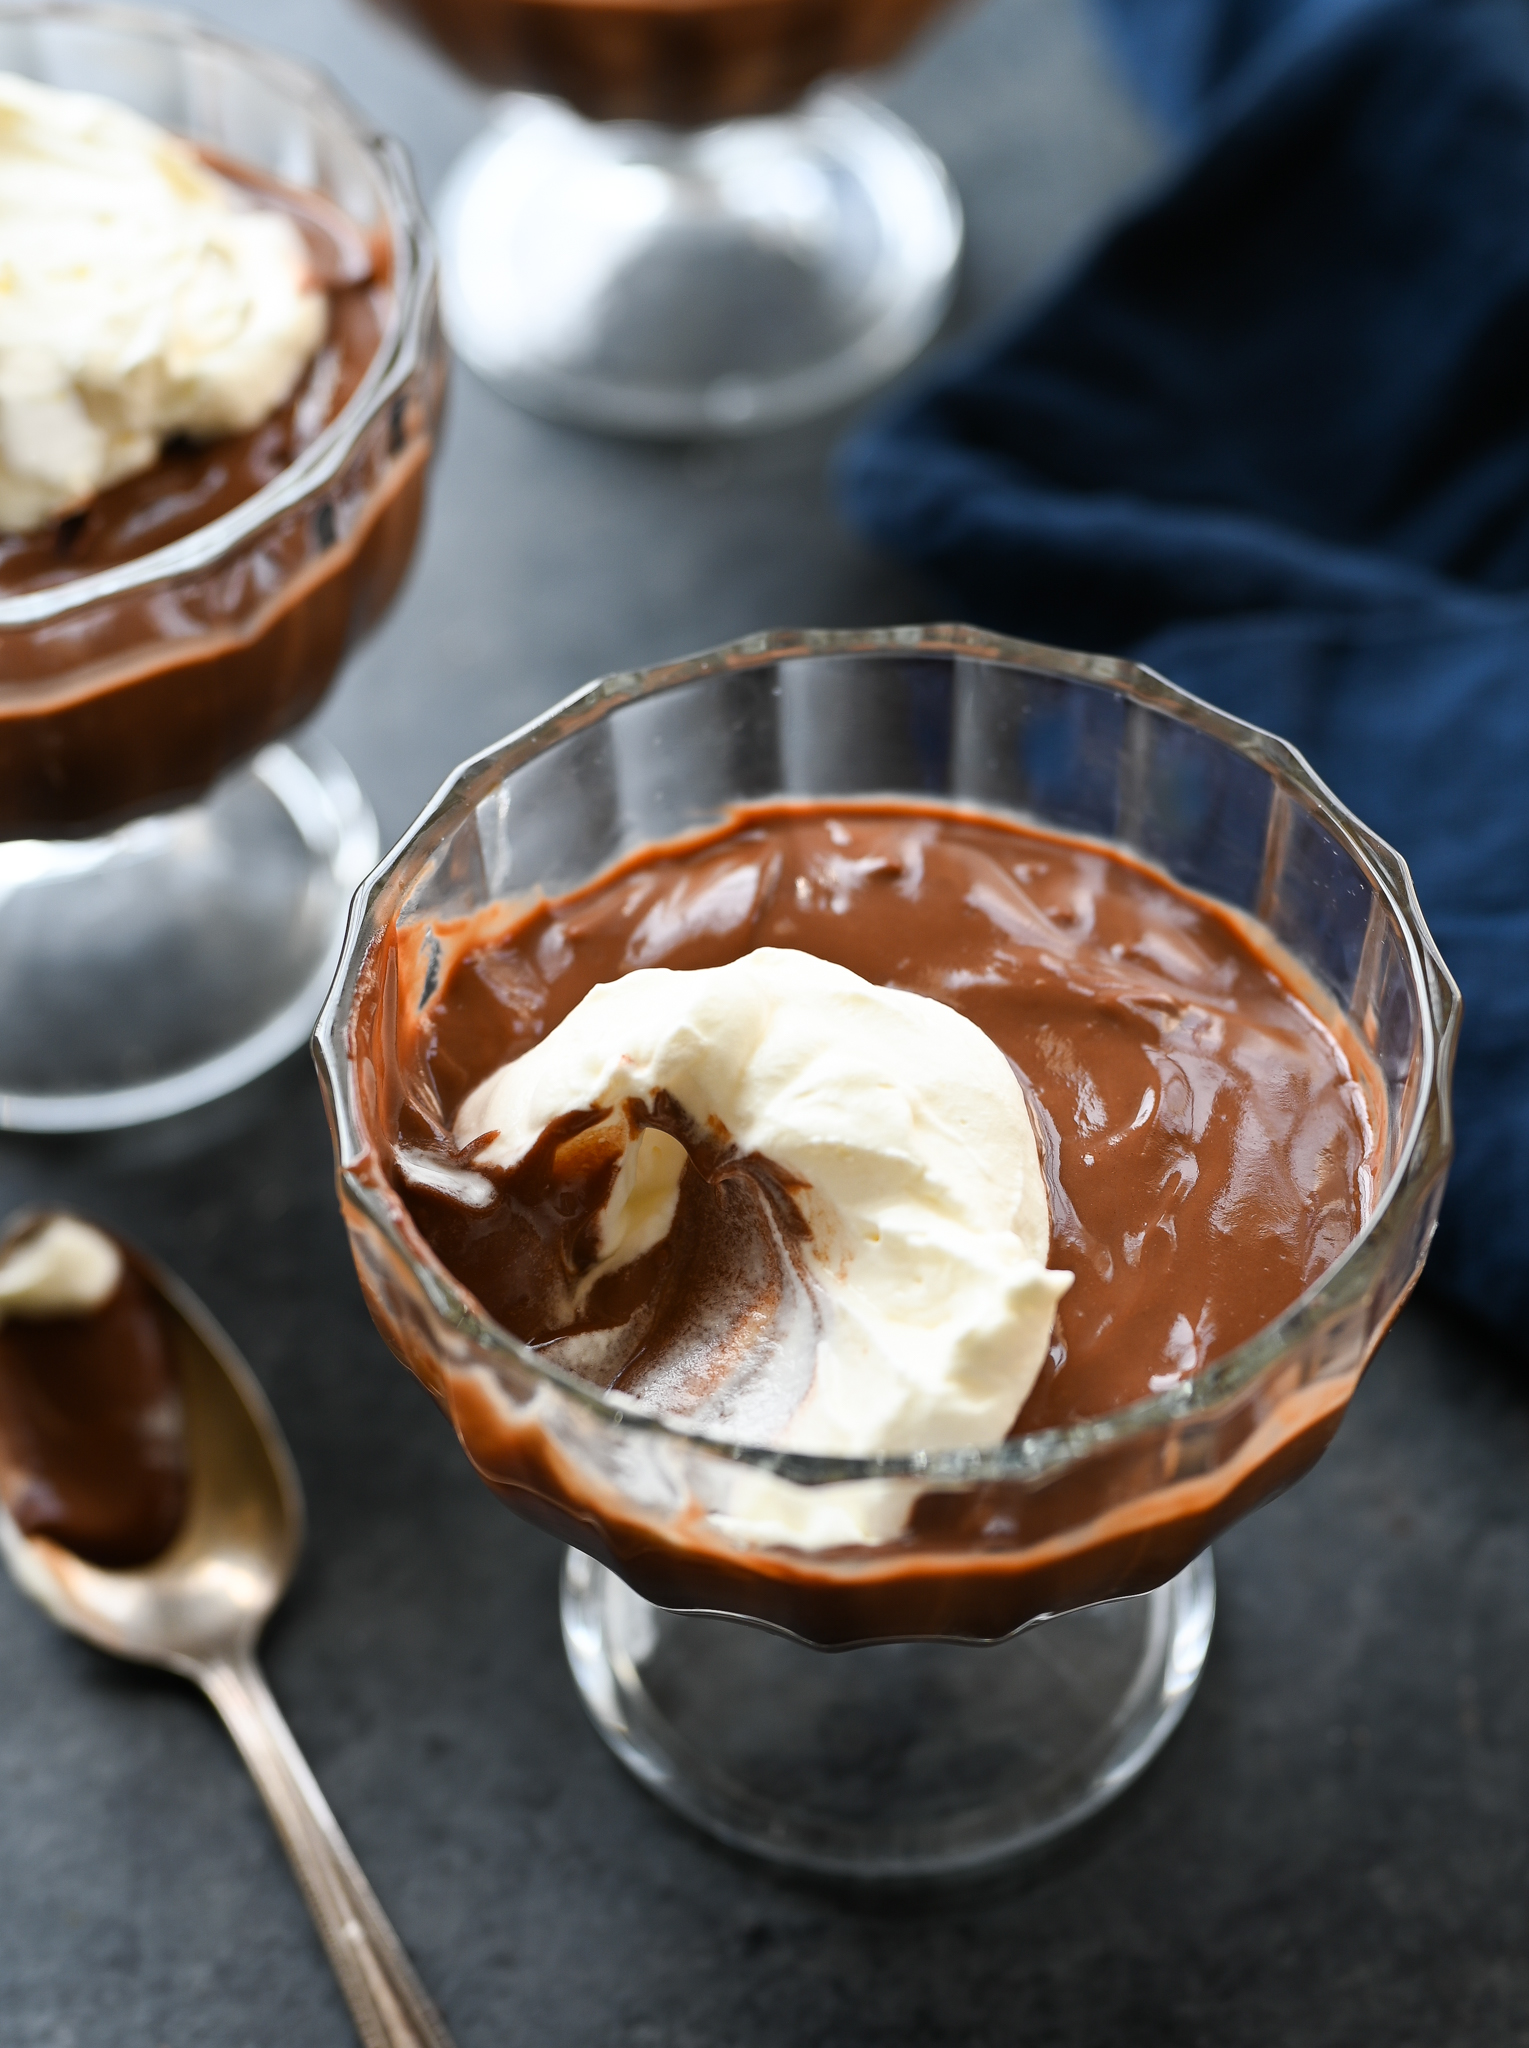 The Best Chocolate Mousse Recipe - Baker by Nature